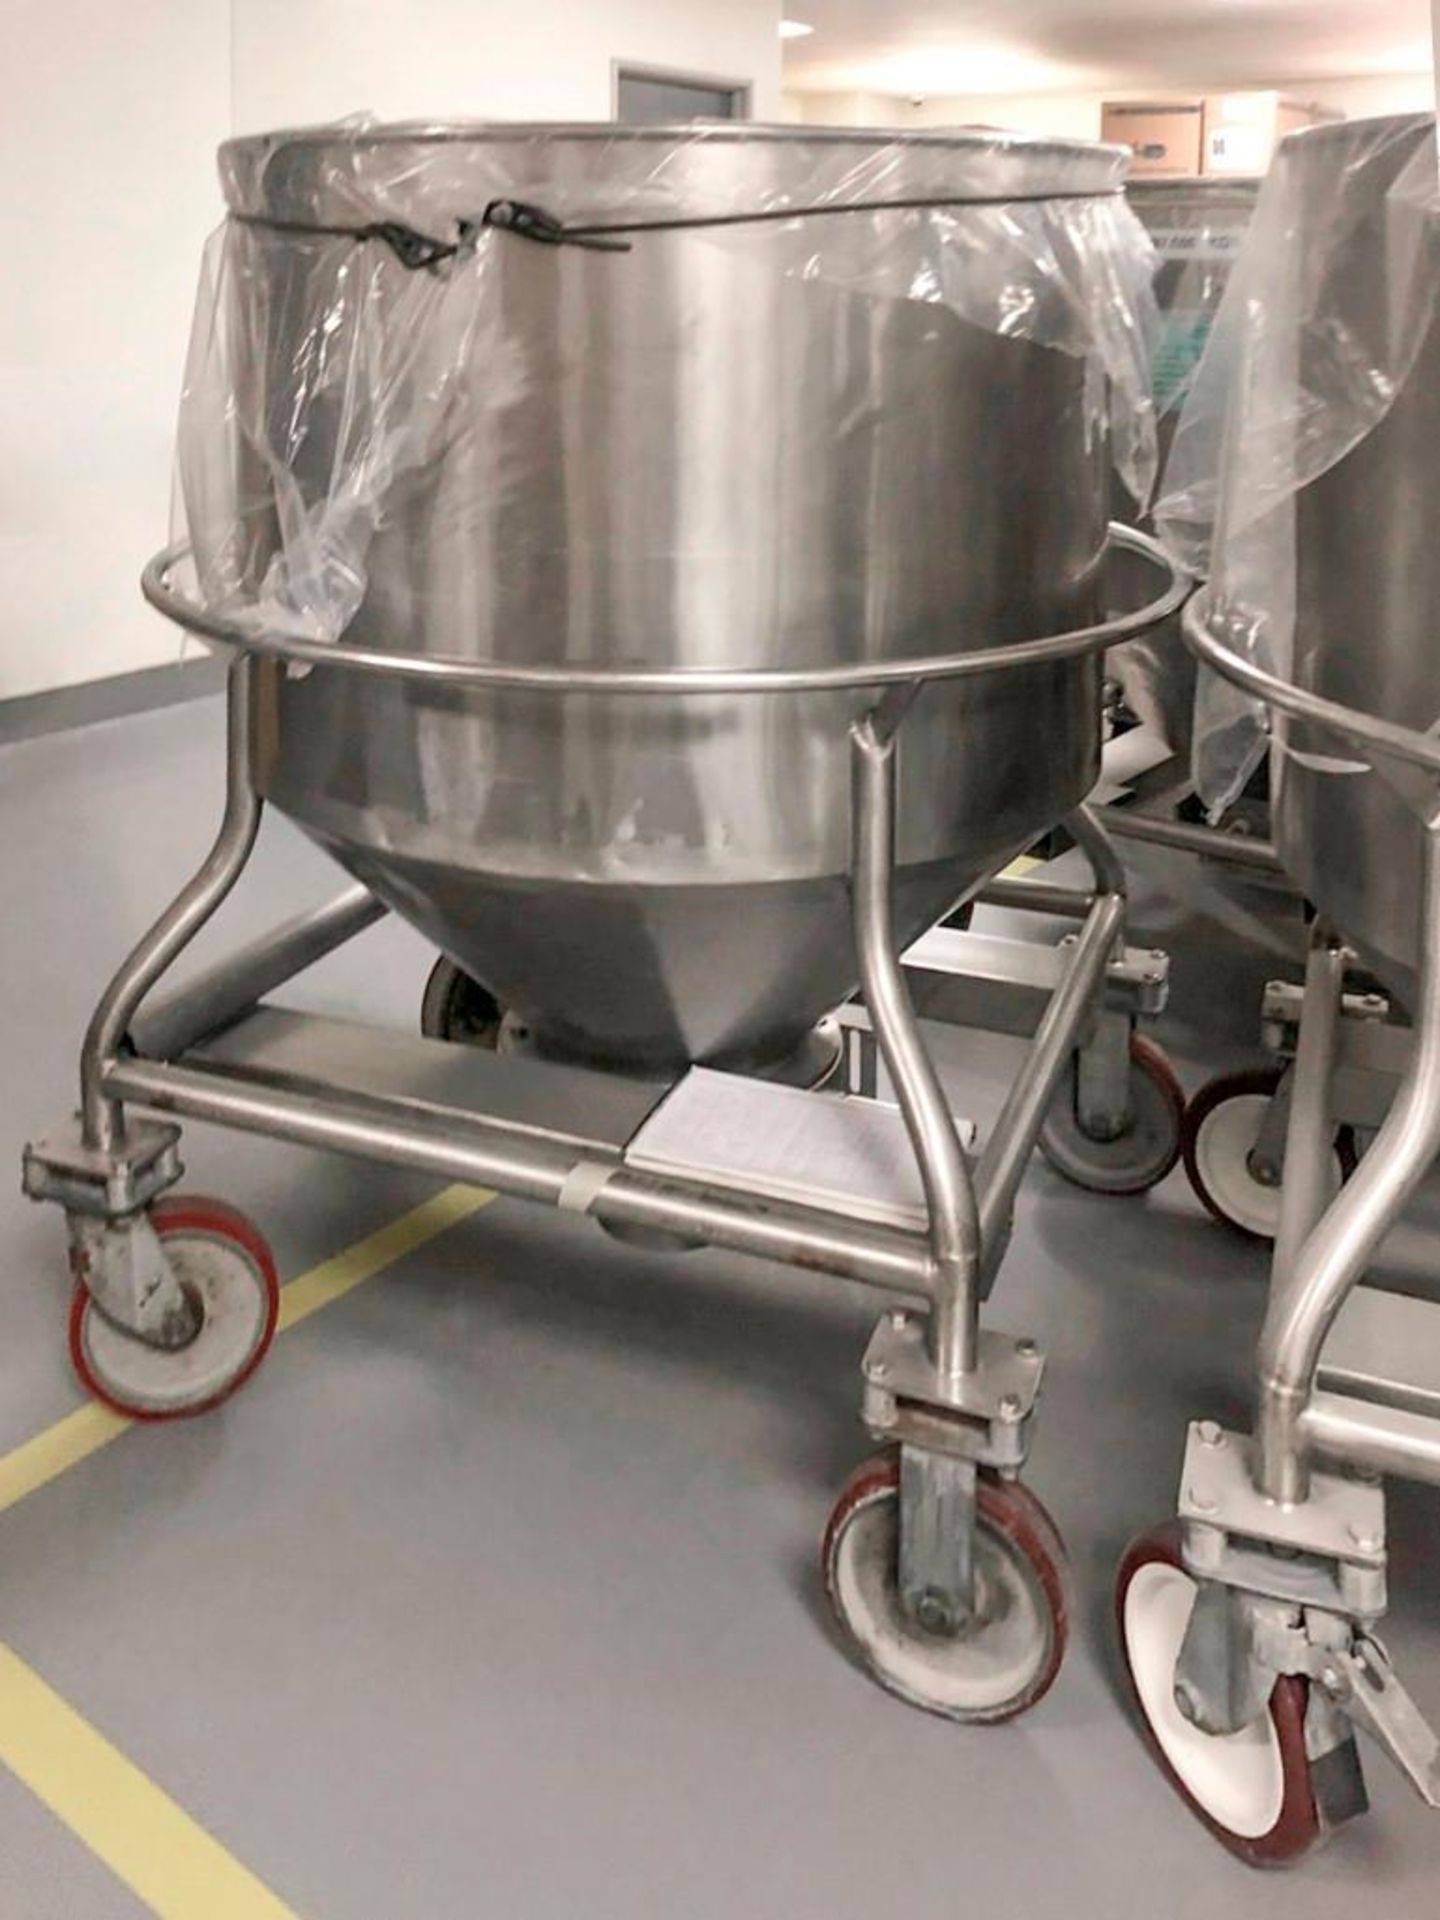 700Kg Capacity Charge Kettle - Image 3 of 12